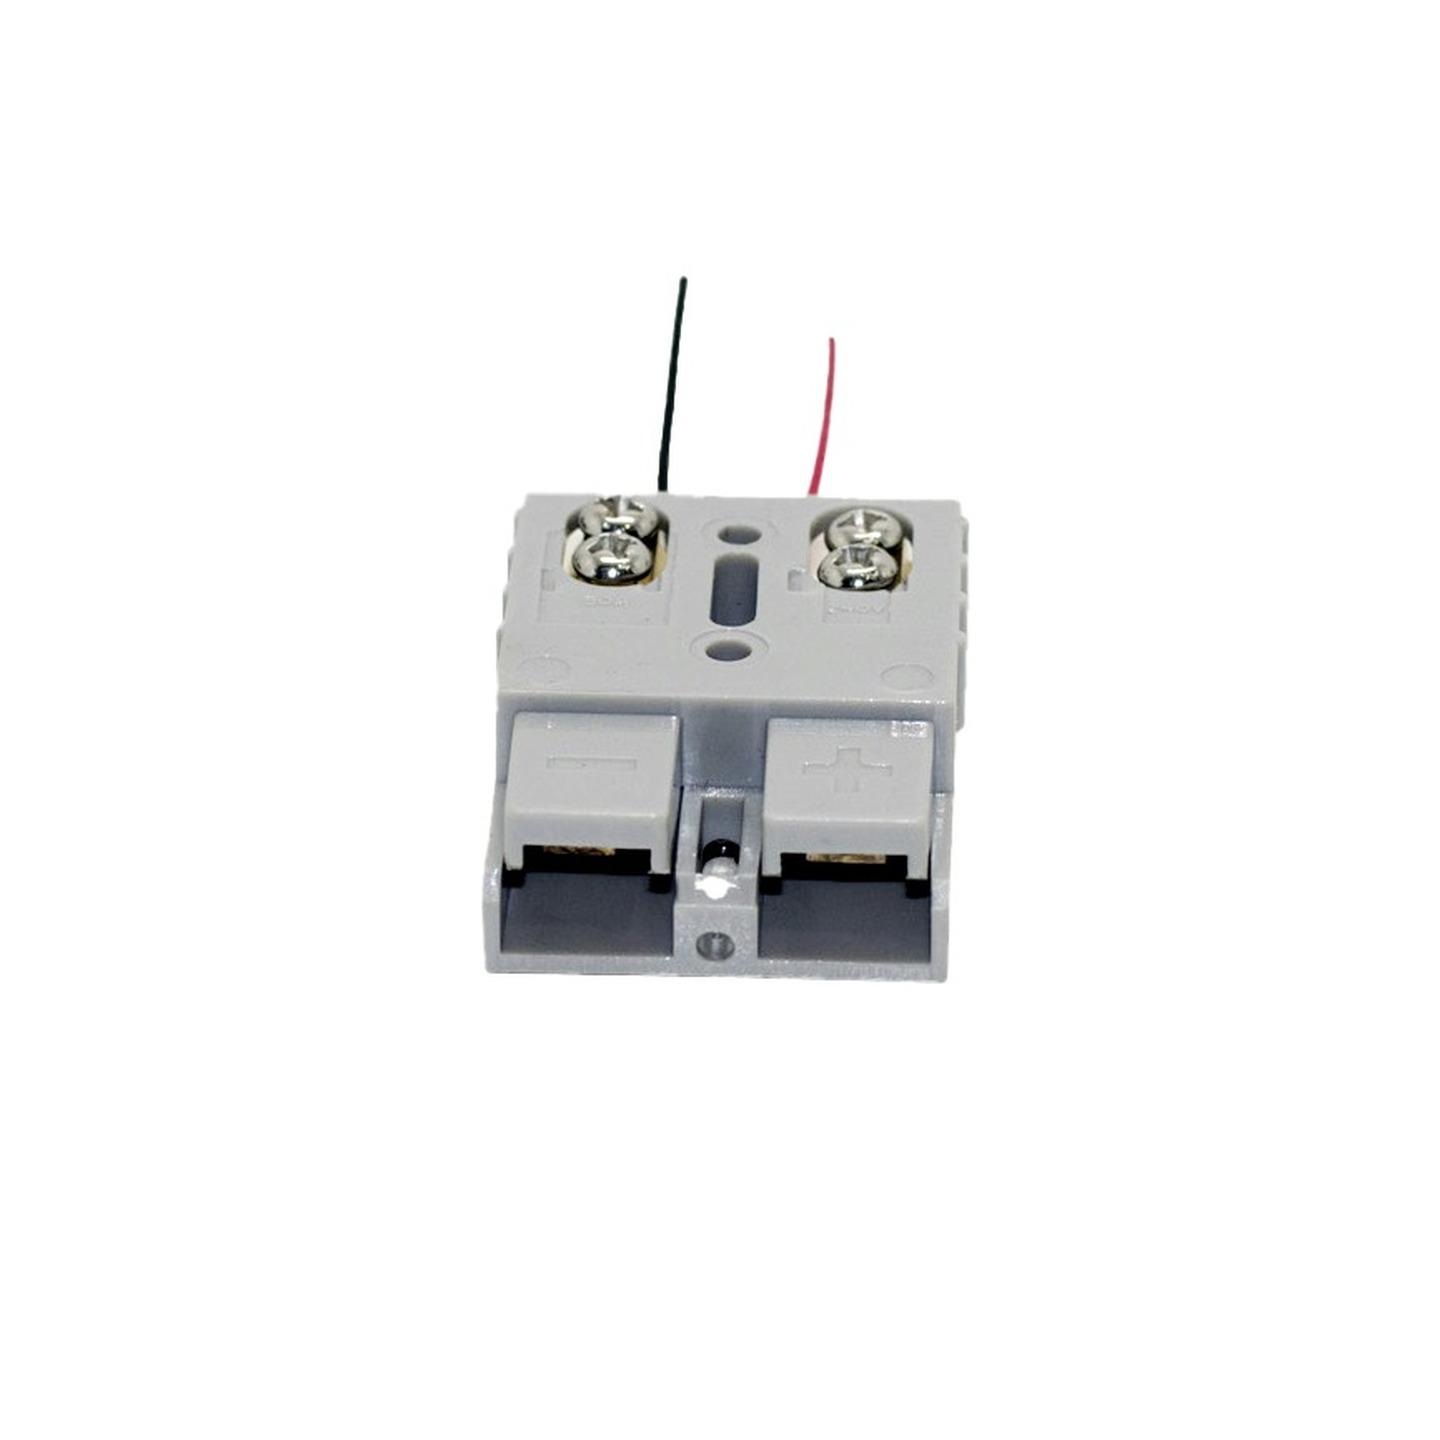 Trailer Vision 2 pole 50A Connector with Screw Terminals and LED Indicator